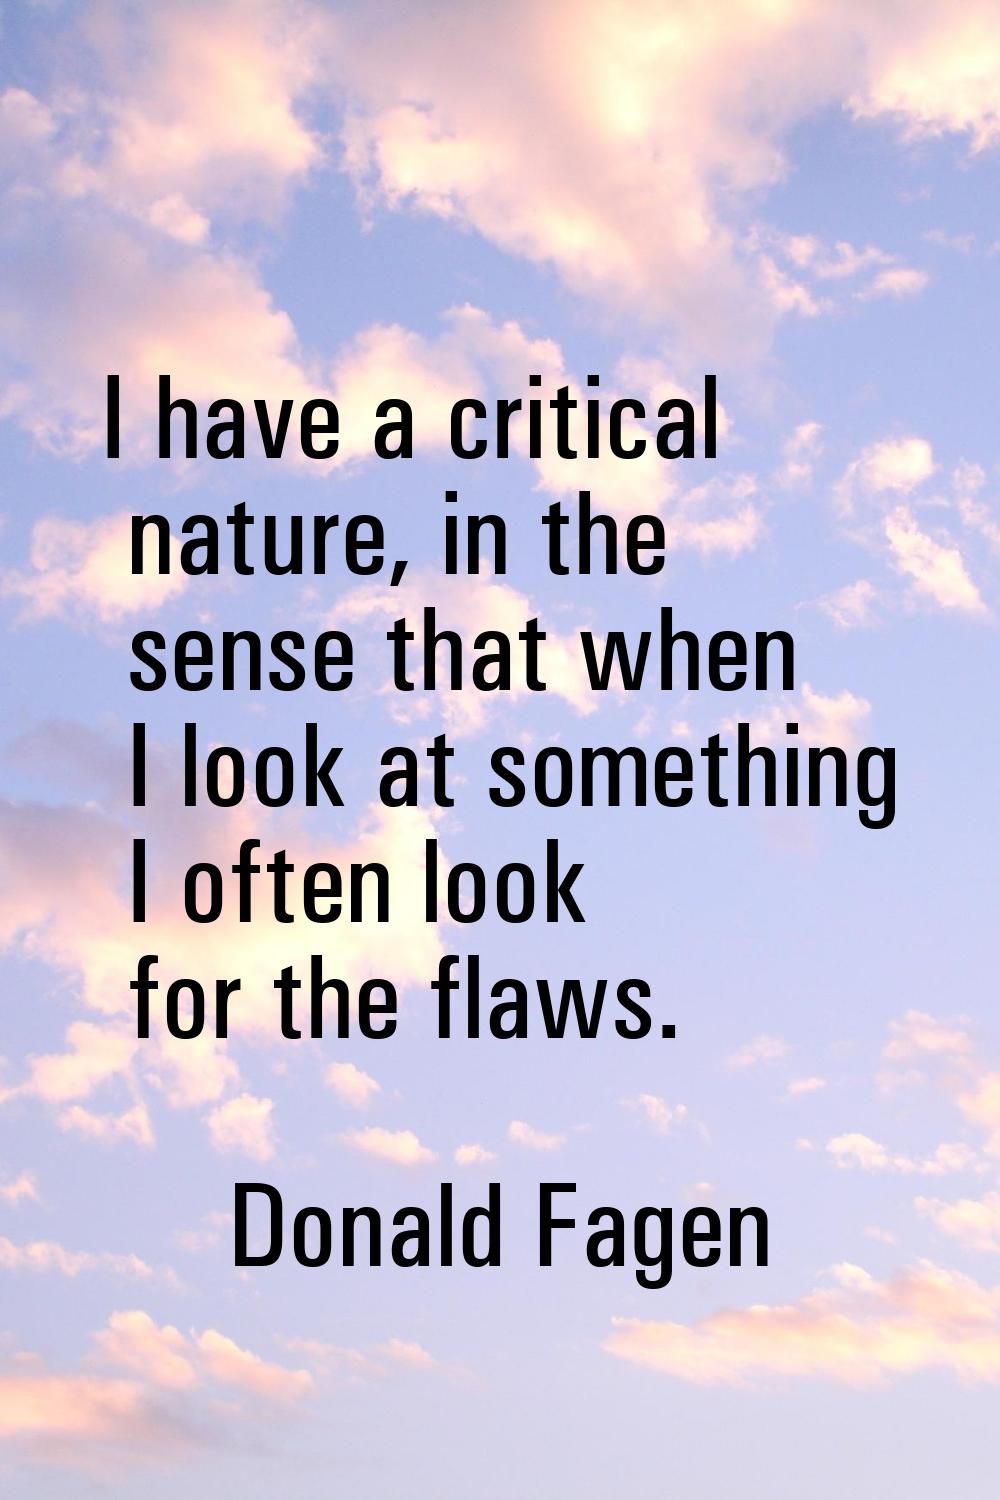 I have a critical nature, in the sense that when I look at something I often look for the flaws.